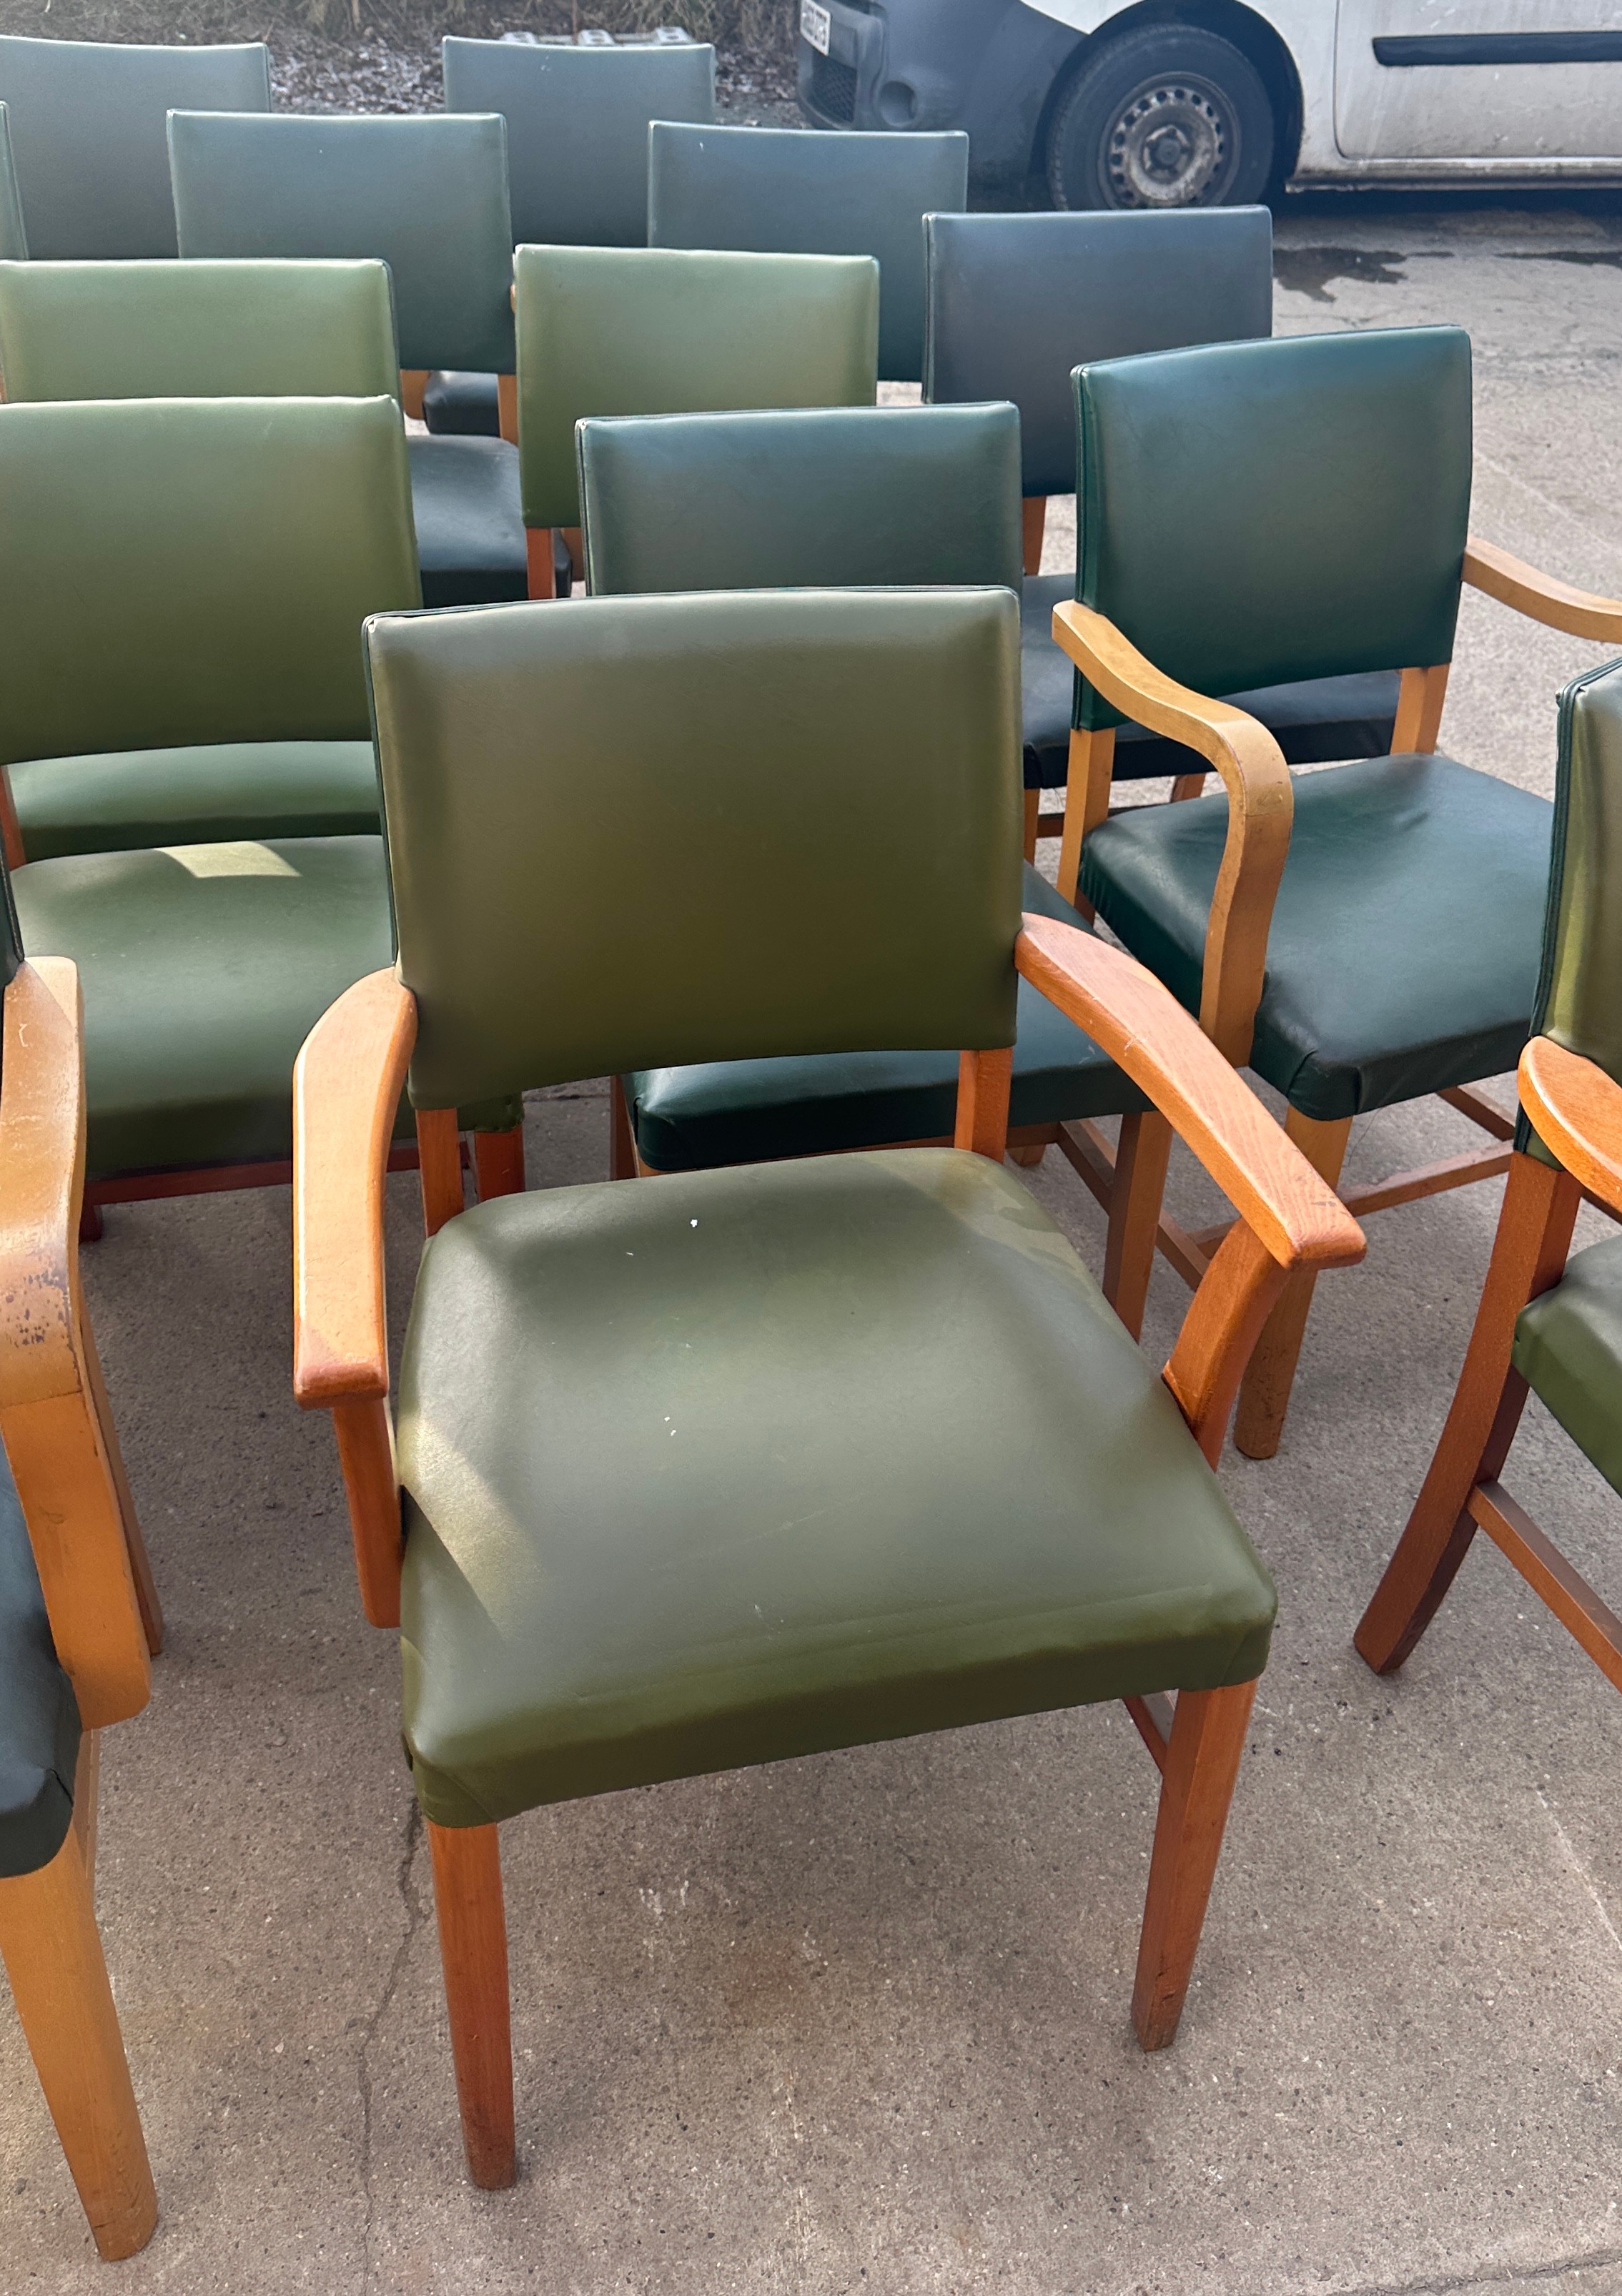 verco vintage board room chairs 16 in total 10 with arms - Image 3 of 4